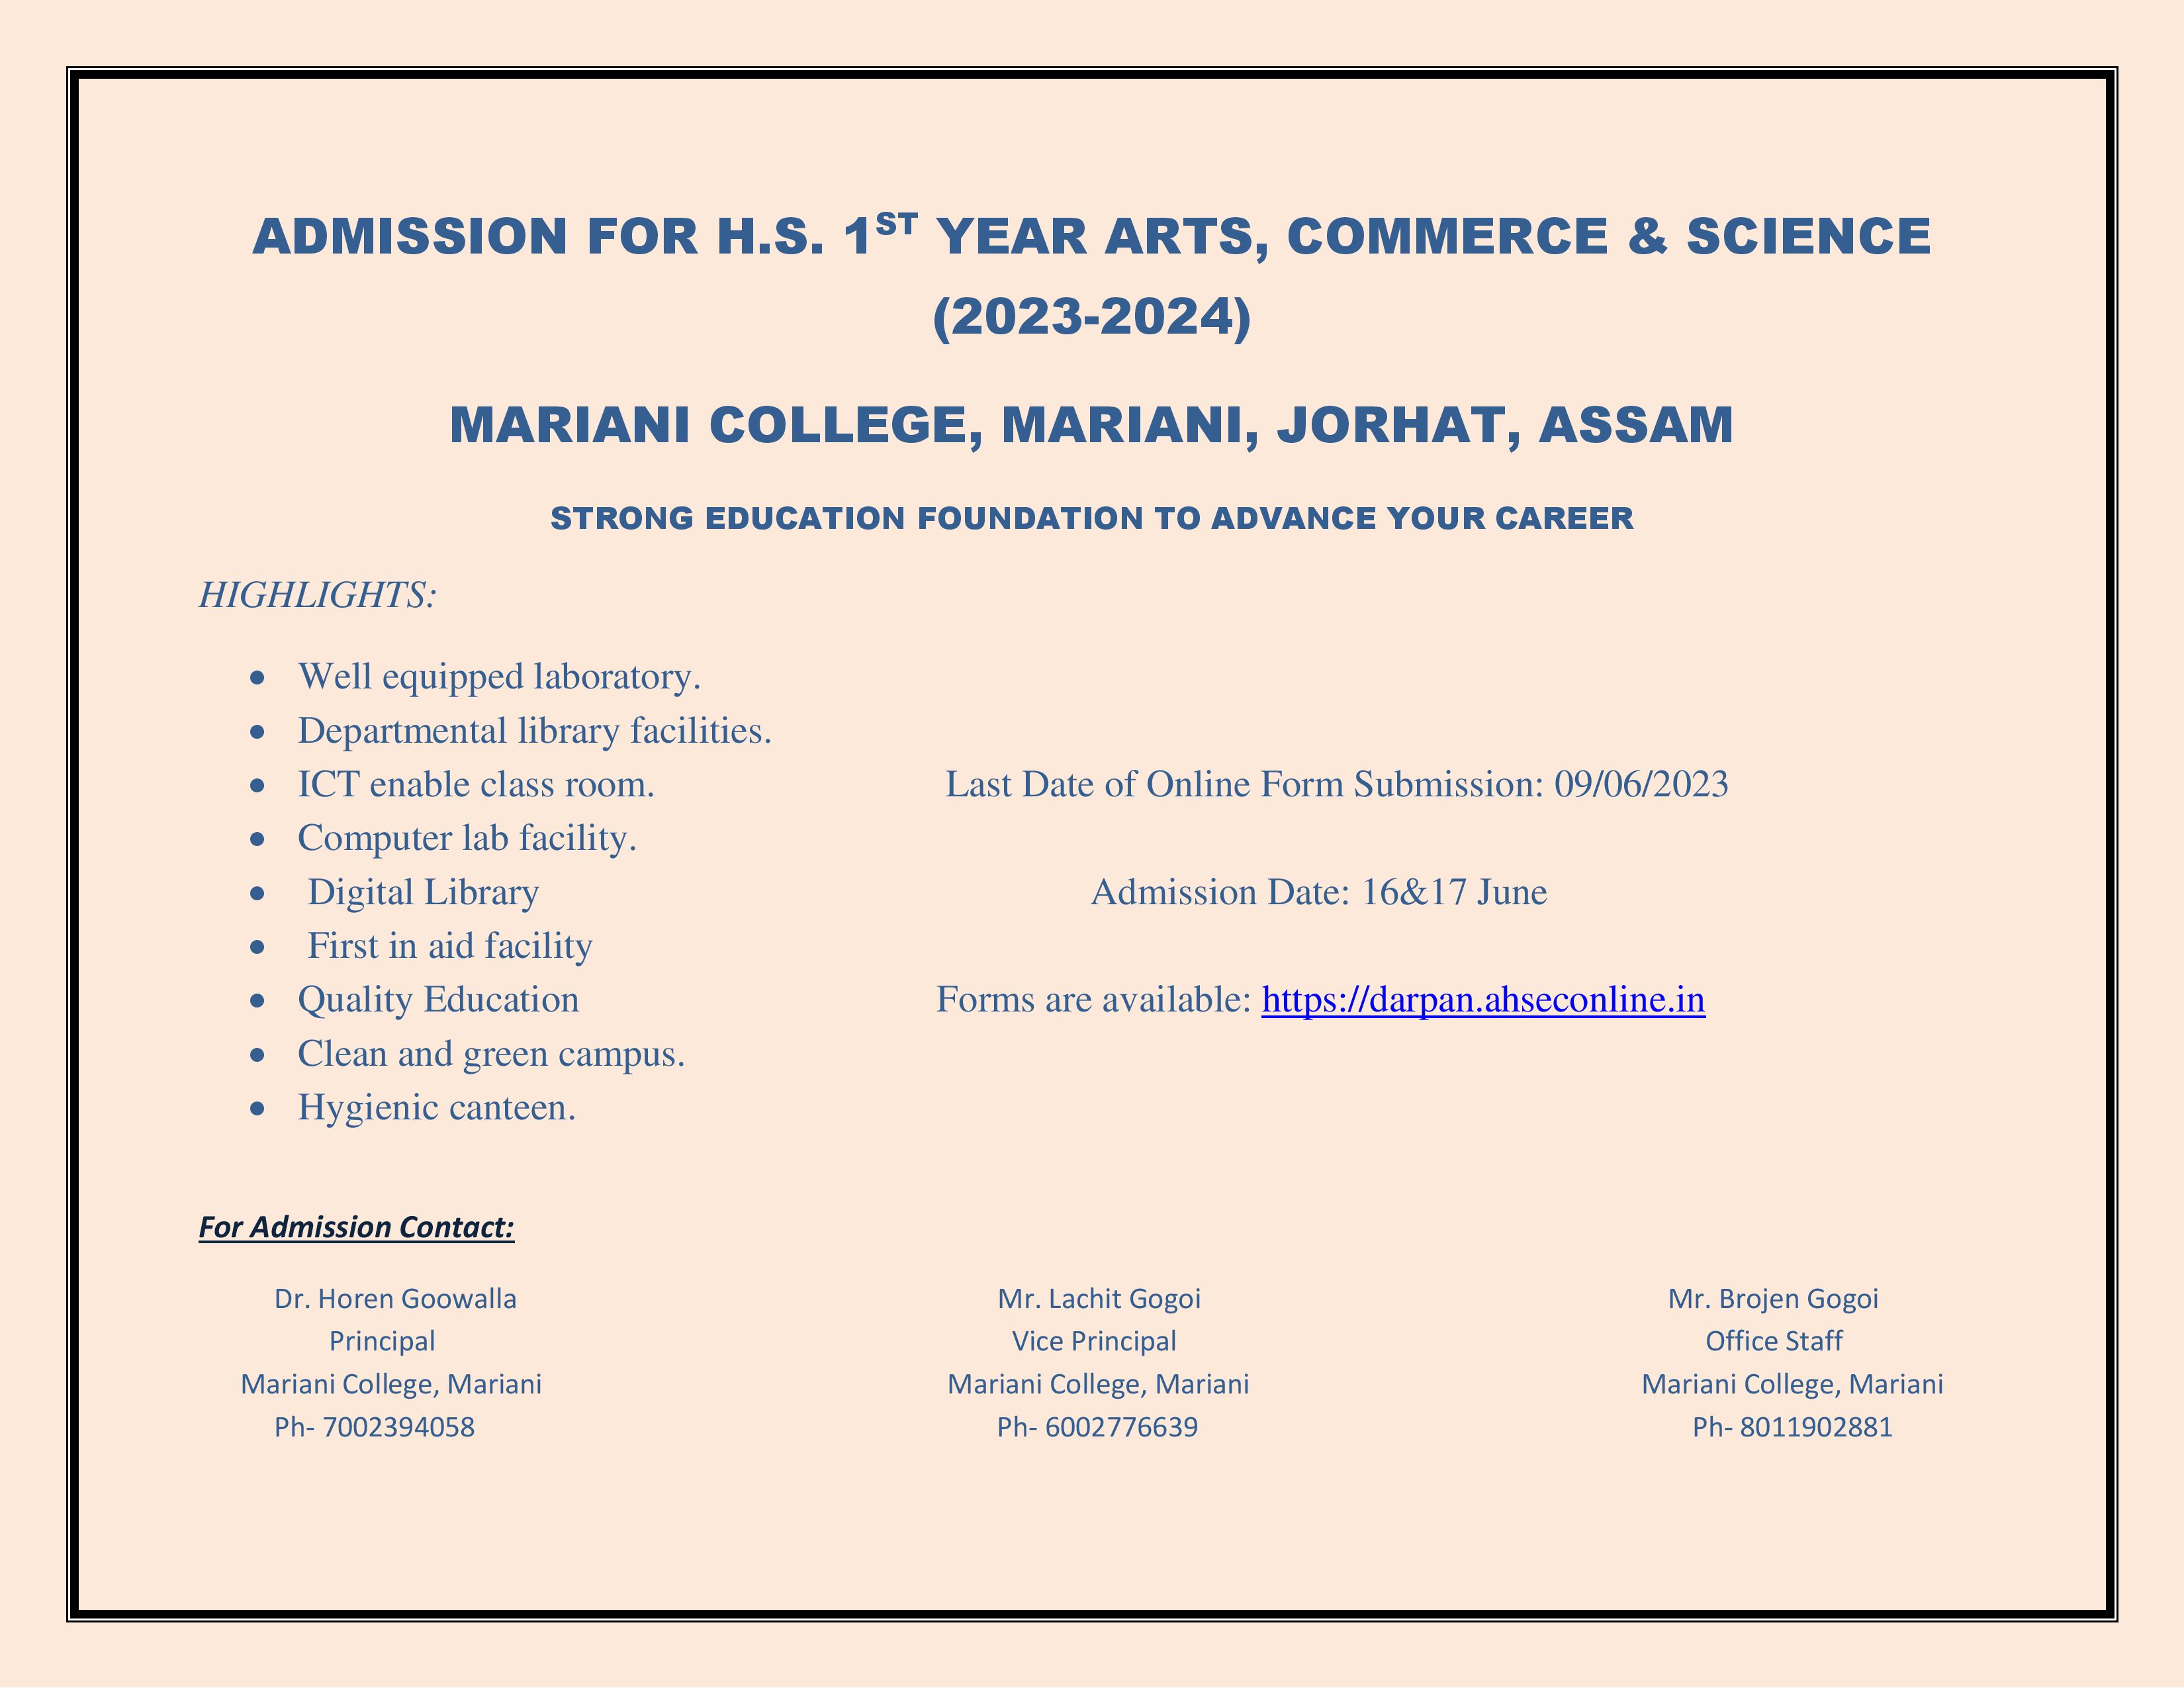 ADMISSION FOR H.S. 1ST YEAR ARTS, COMMERCE & SCIENCE (2023-2024)